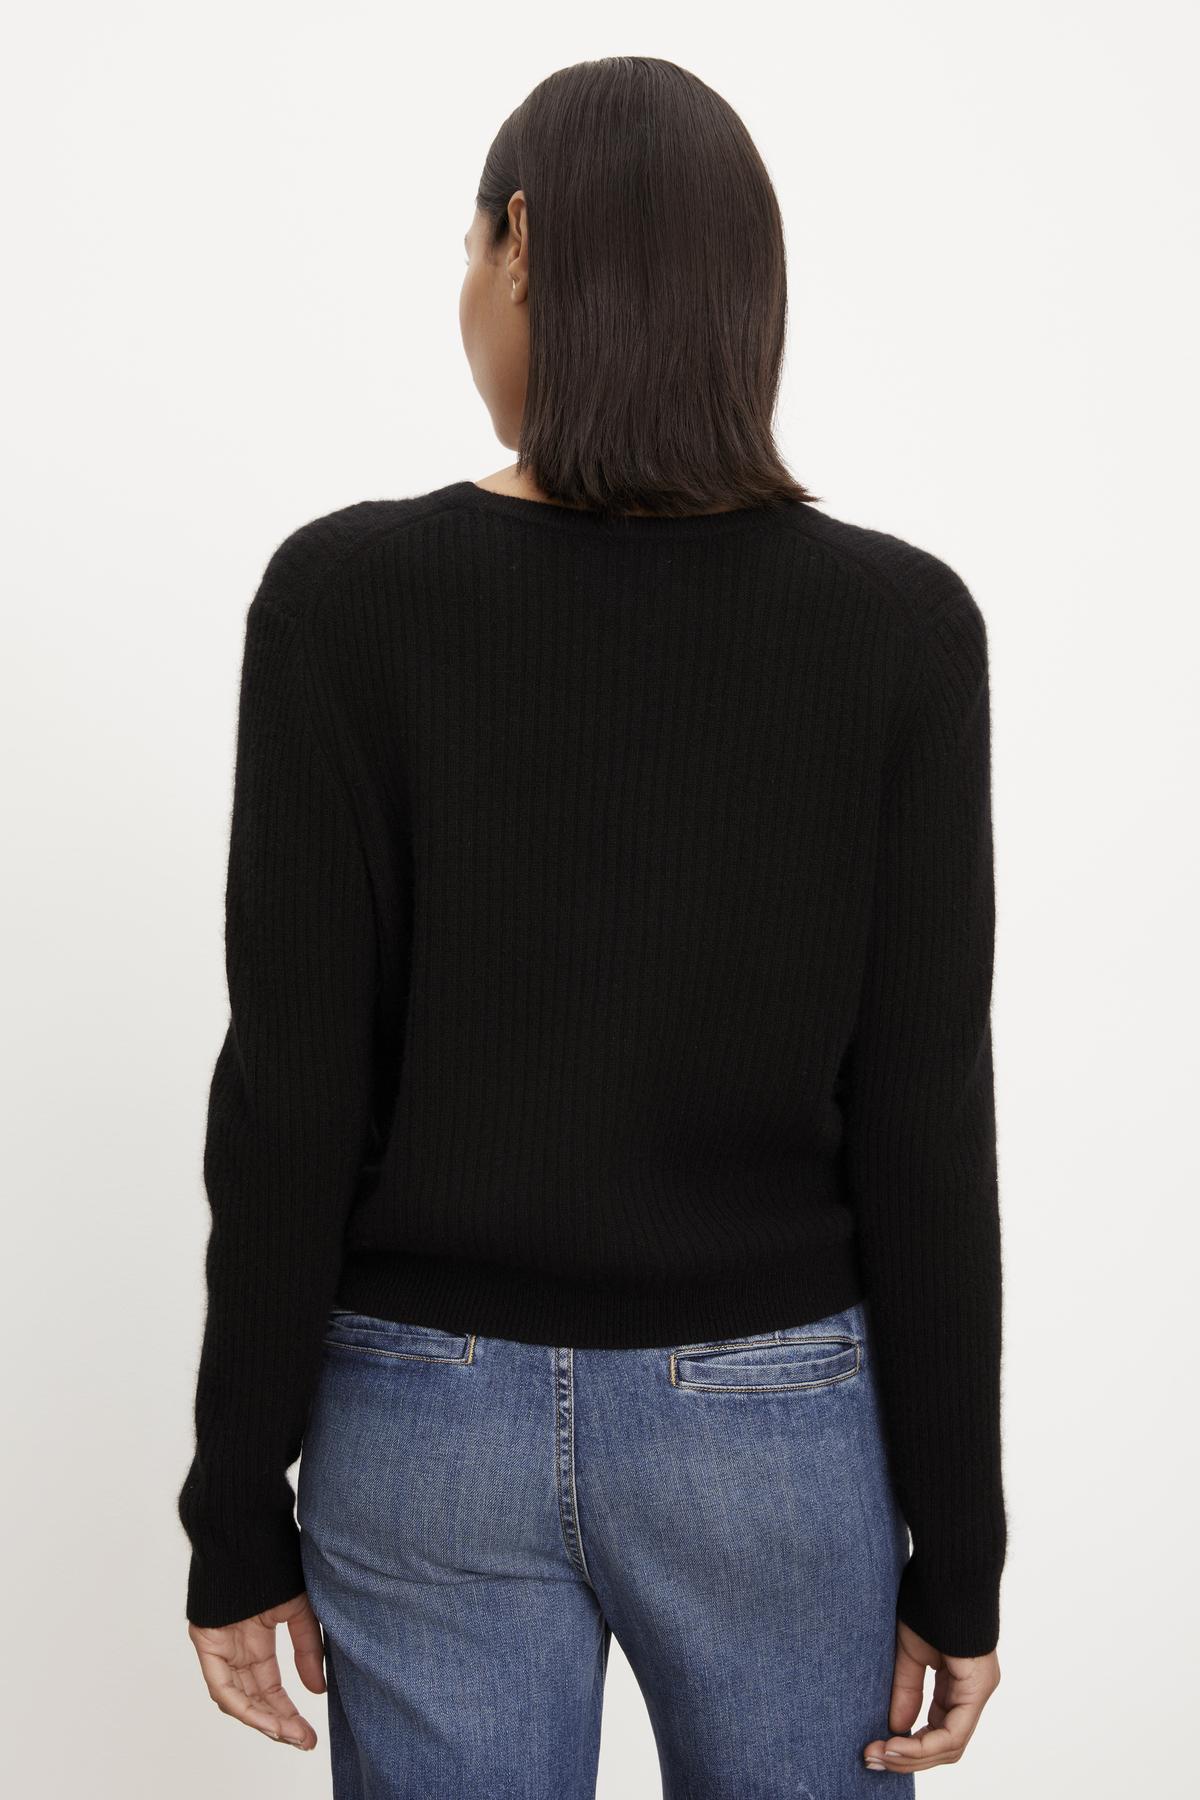   The back view of a person wearing a Velvet by Graham & Spencer CORALIE CASHMERE CARDIGAN and jeans. 